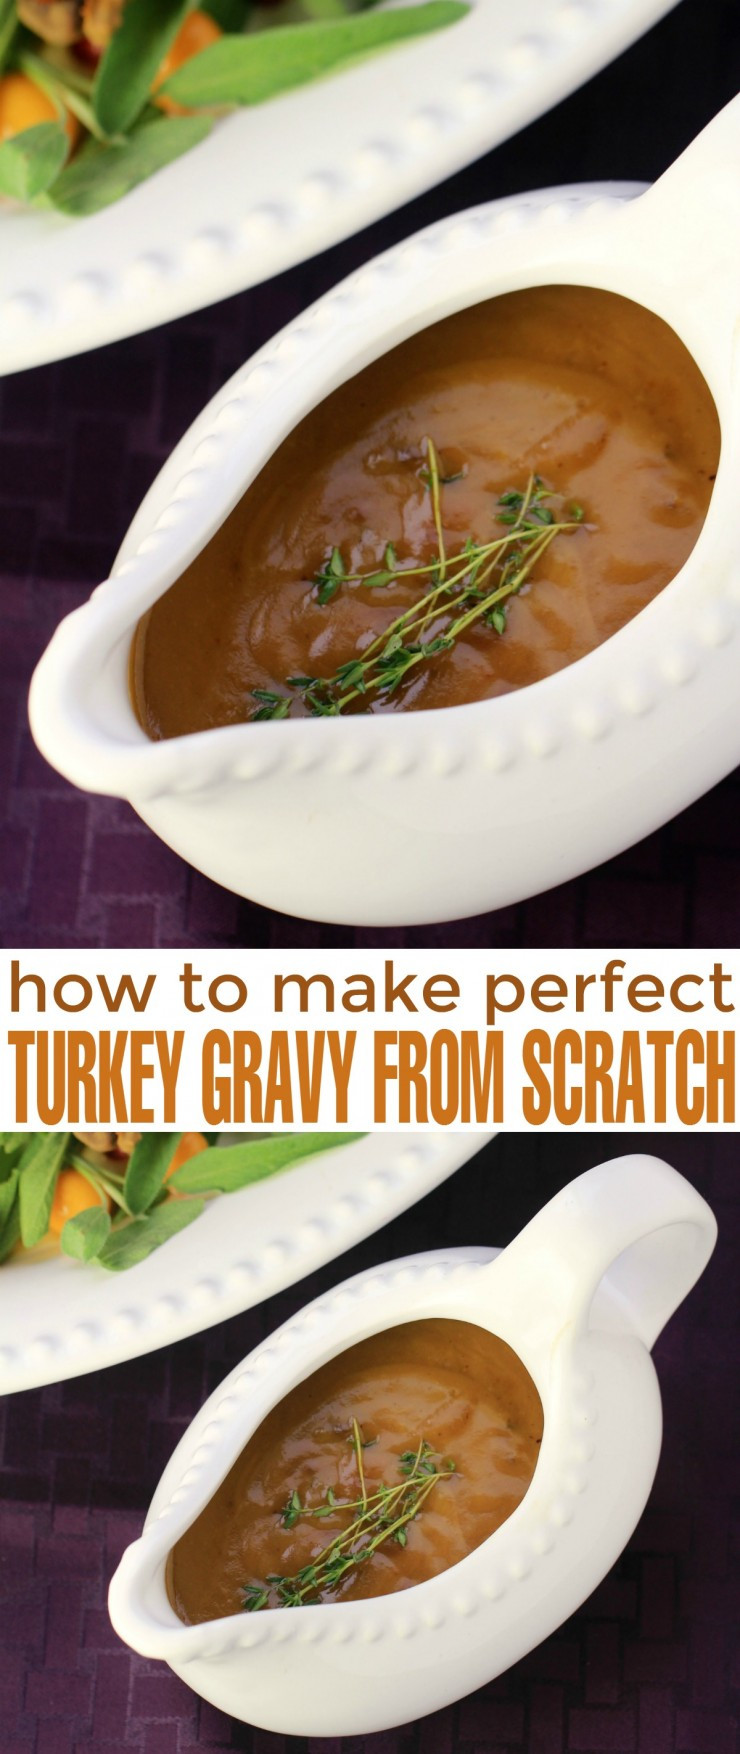 How To Make Gravy From Turkey Drippings
 How to Make Perfect Turkey Gravy from Scratch Life Love Liz